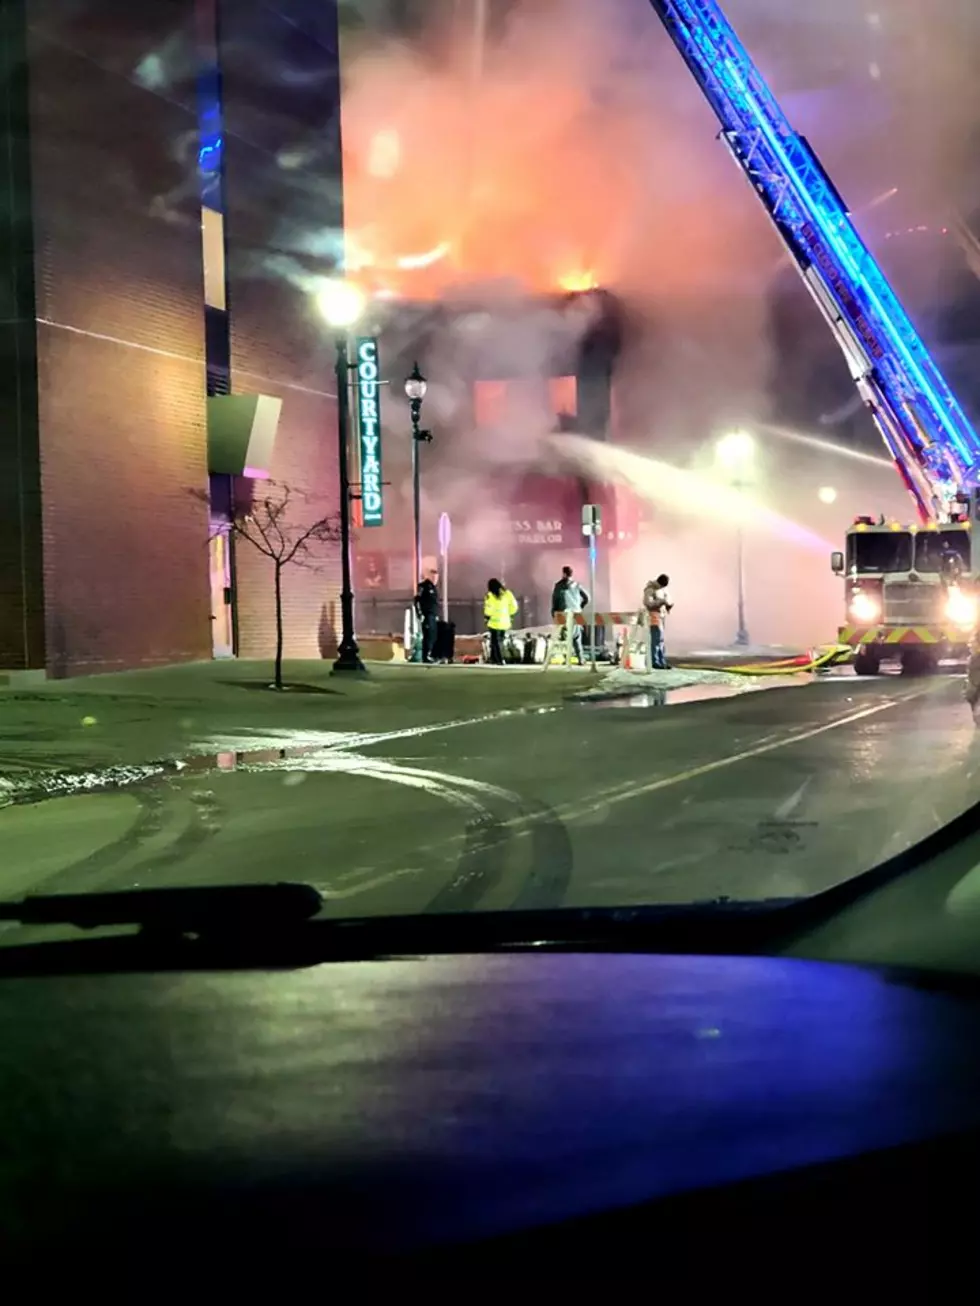 Video Footage of Press Bar Fire Aftermath [WATCH]